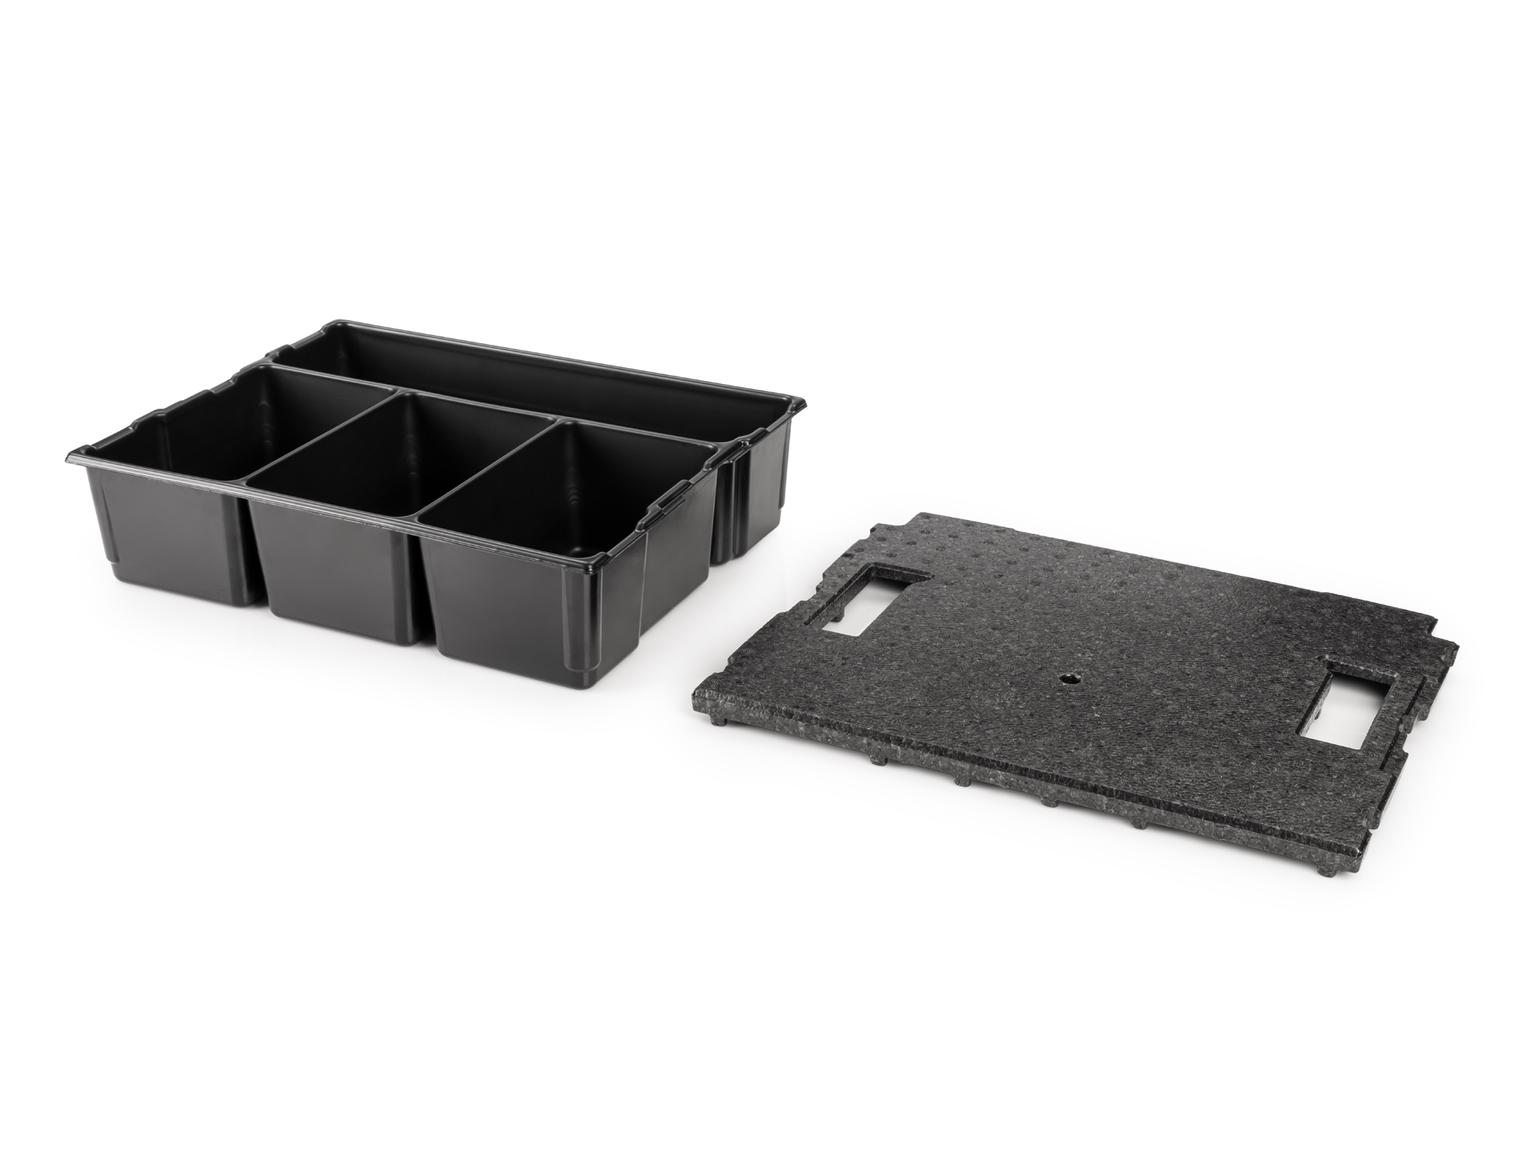 4-Cavity Parts Tray and Lid Insert for Stacking Tool Box